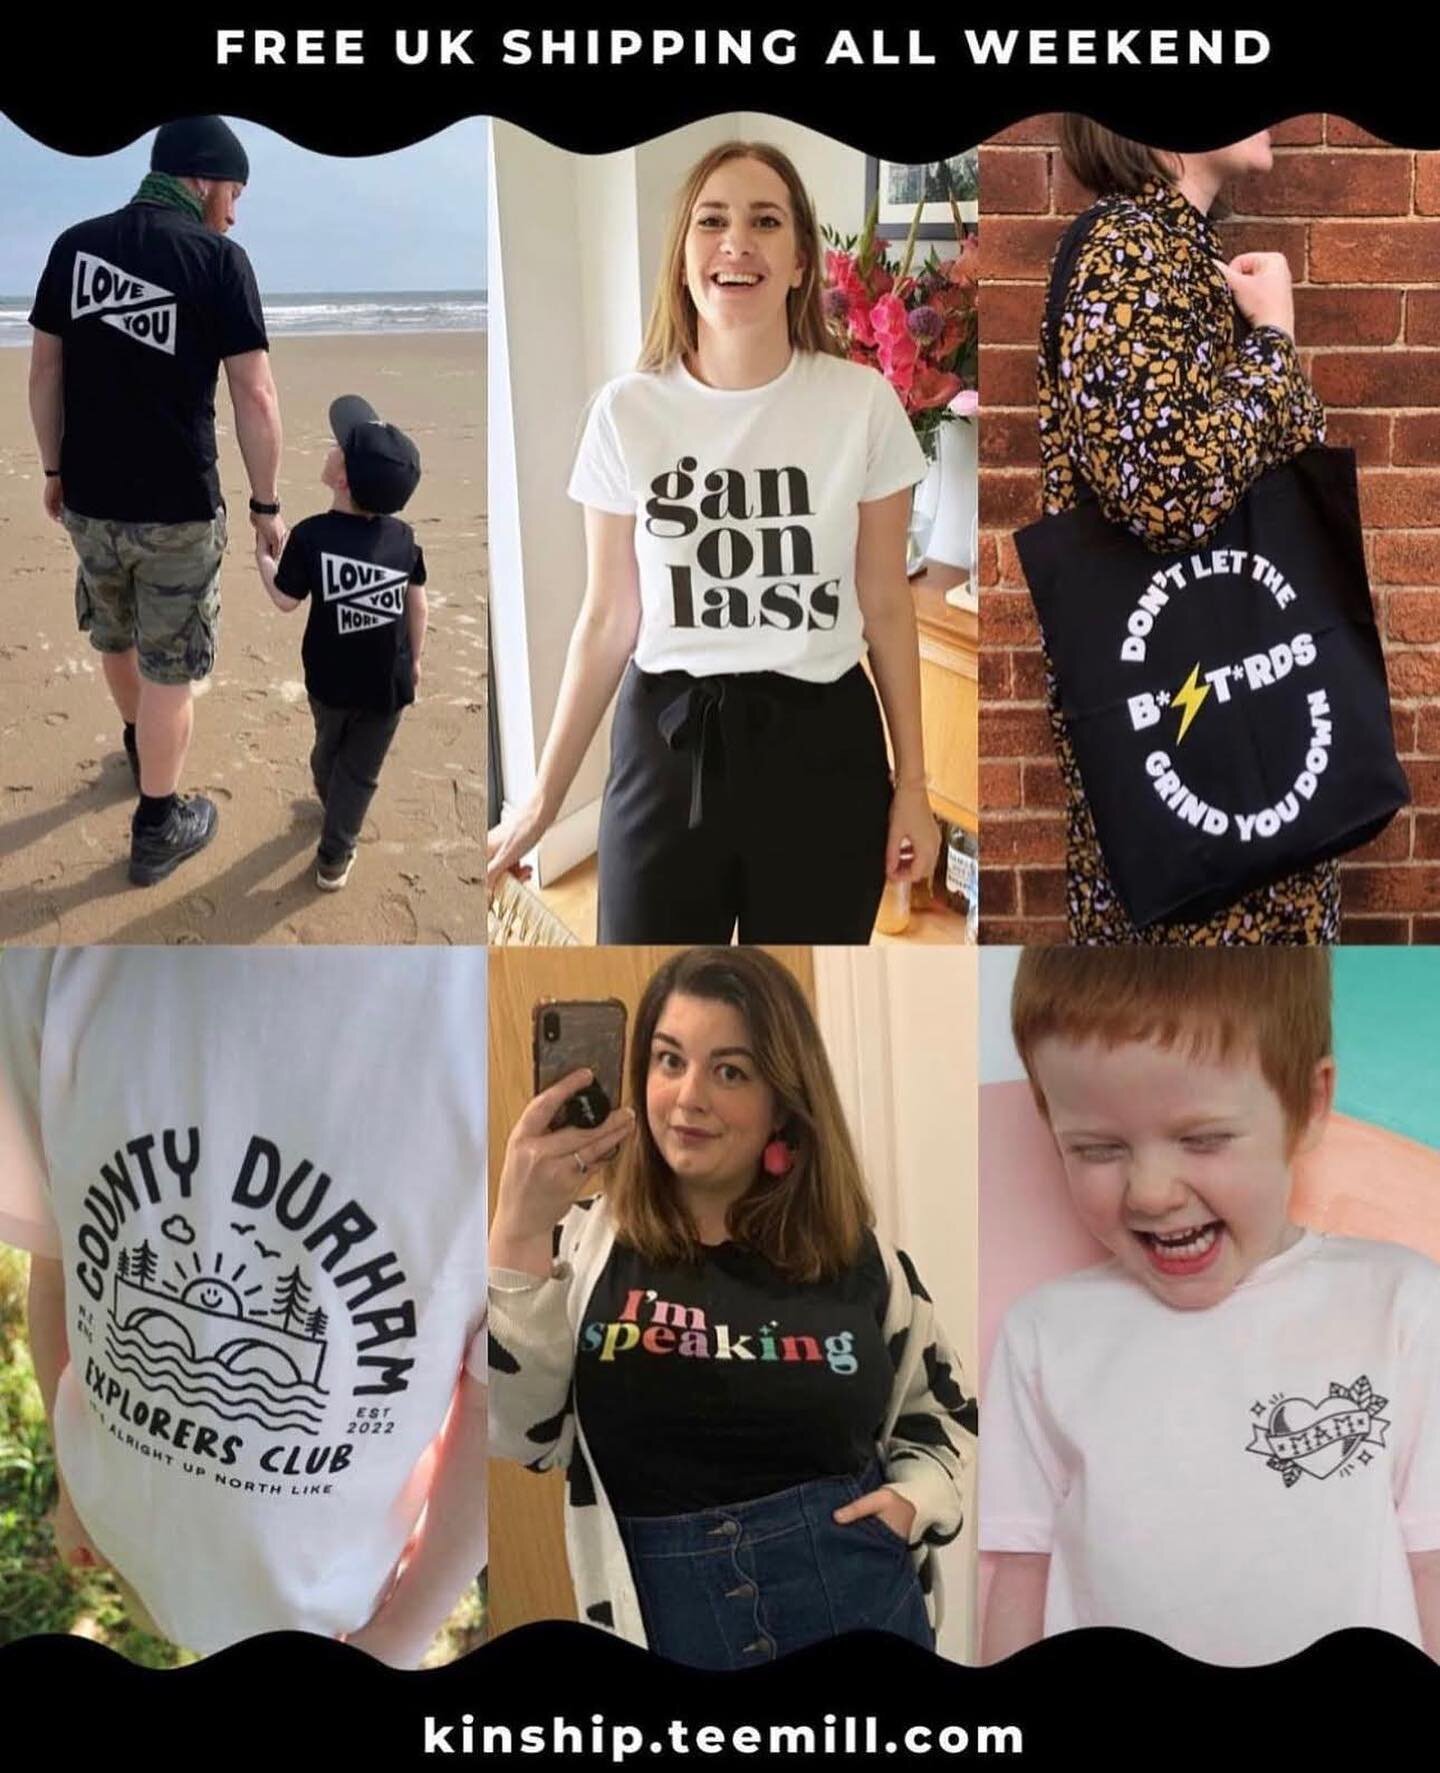 FREE UK SHIPPING NOW LIVE 💌 From now until midnight Sun 4th Feb, get free UK shipping on our Teemill store. Includes clothing, prints, accessories and &lsquo;create your own&rsquo;. All our clothing is 100% organic cotton, printed on demand in the U